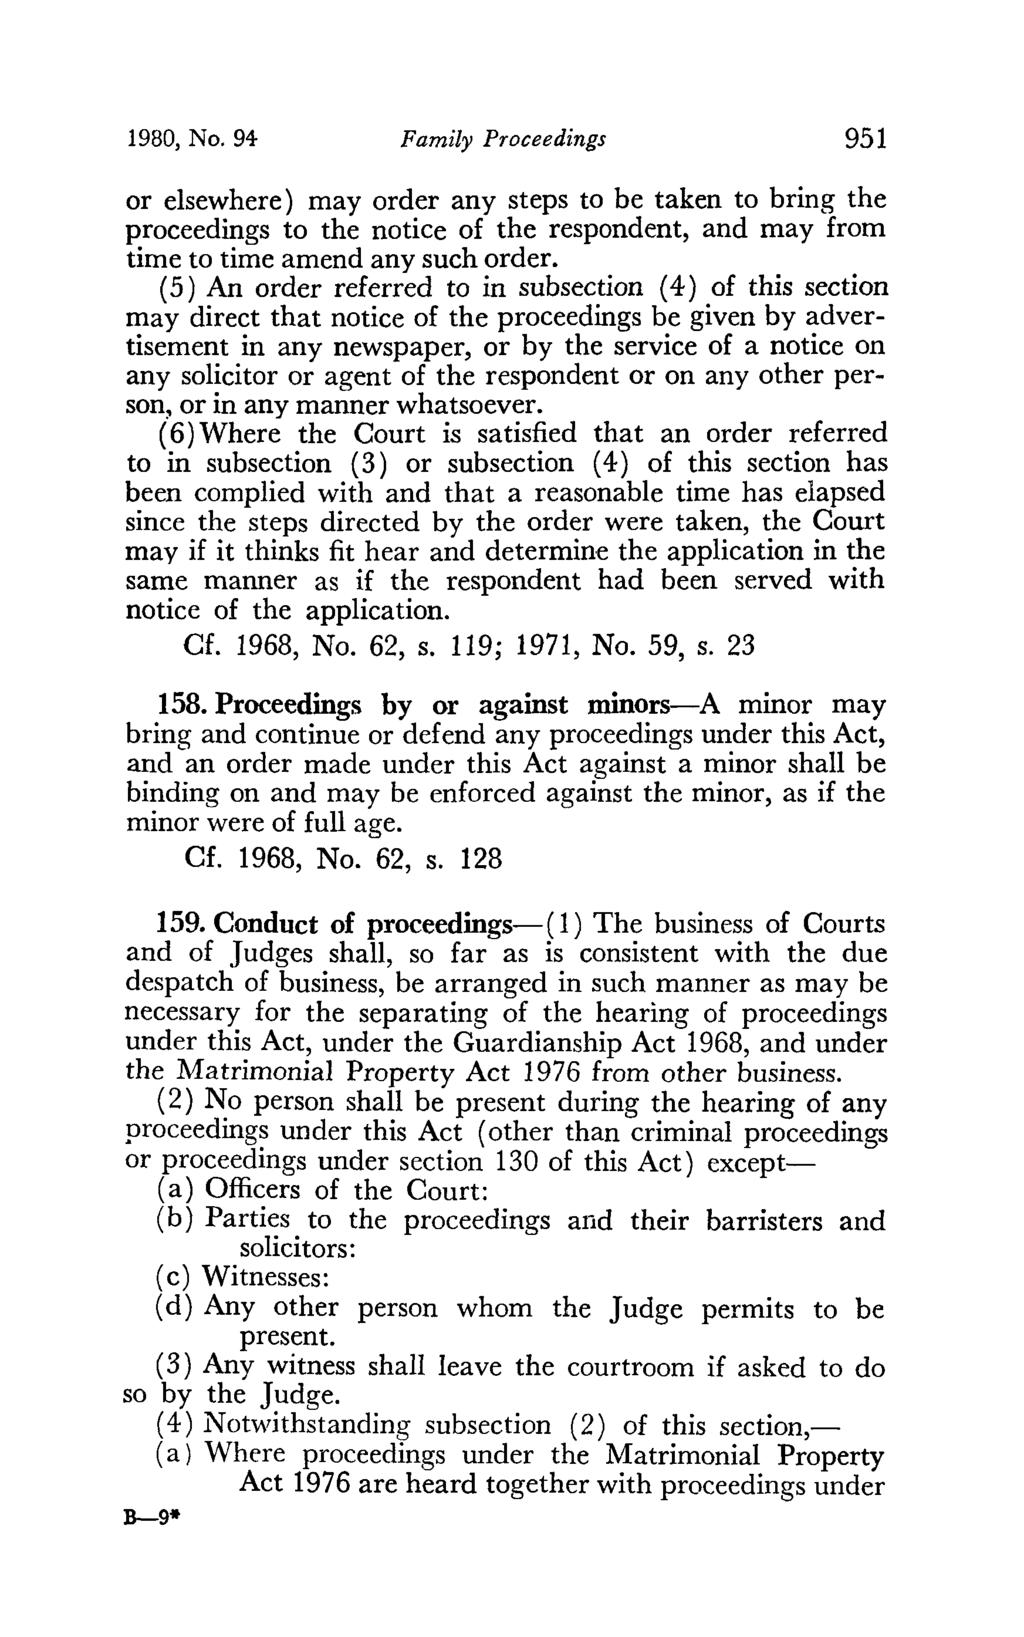 1980, No. 94 Family Proceedings 951 or elsewhere) may order any steps to be taken to bring the proceedings to the notice of the respondent, and may from time to time amend any such order.